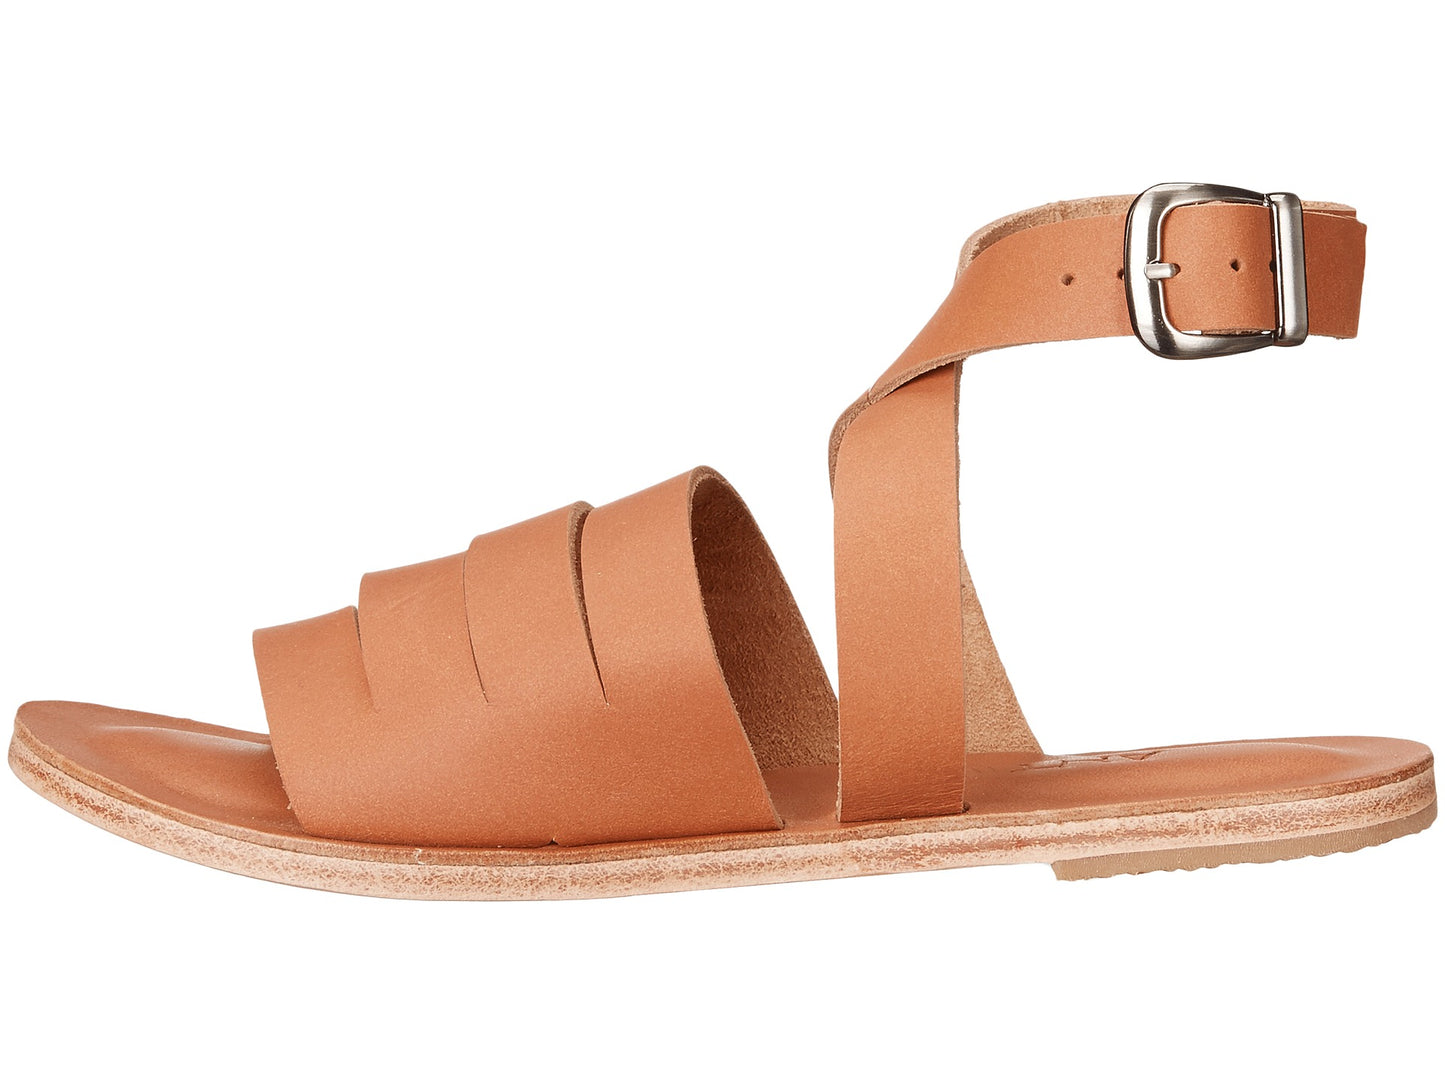 Santa Monica Blvd tan, handmade leather sandals with anklet strap and buckle  - Side View